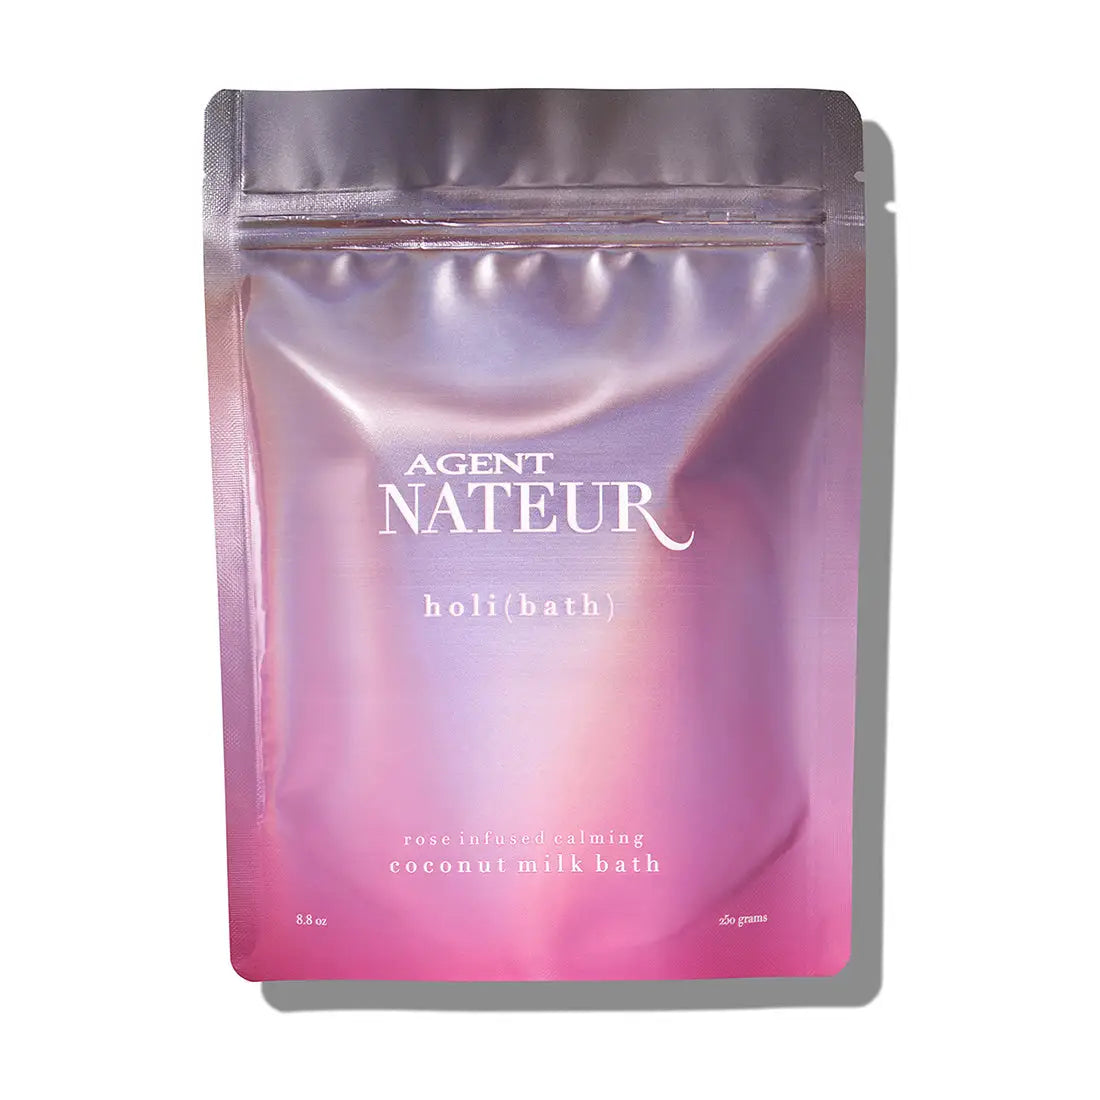 Agent Nateur Holi (Water) Pearl & Rose Hyaluronic Essence